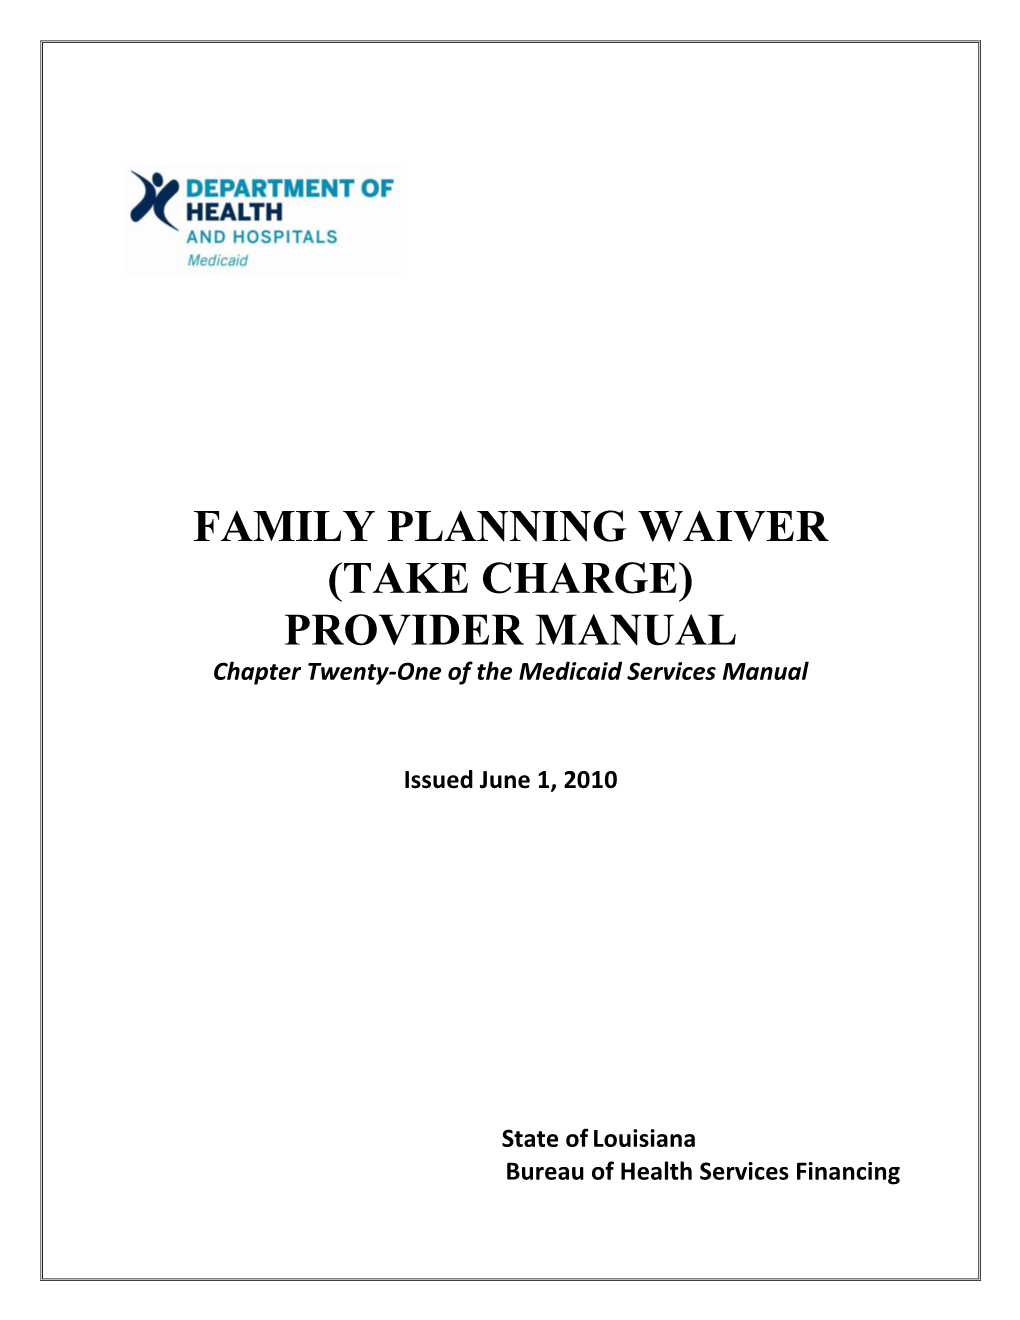 FAMILY PLANNING WAIVER (TAKE CHARGE) PROVIDER MANUAL Chapter Twenty-One of the Medicaid Services Manual